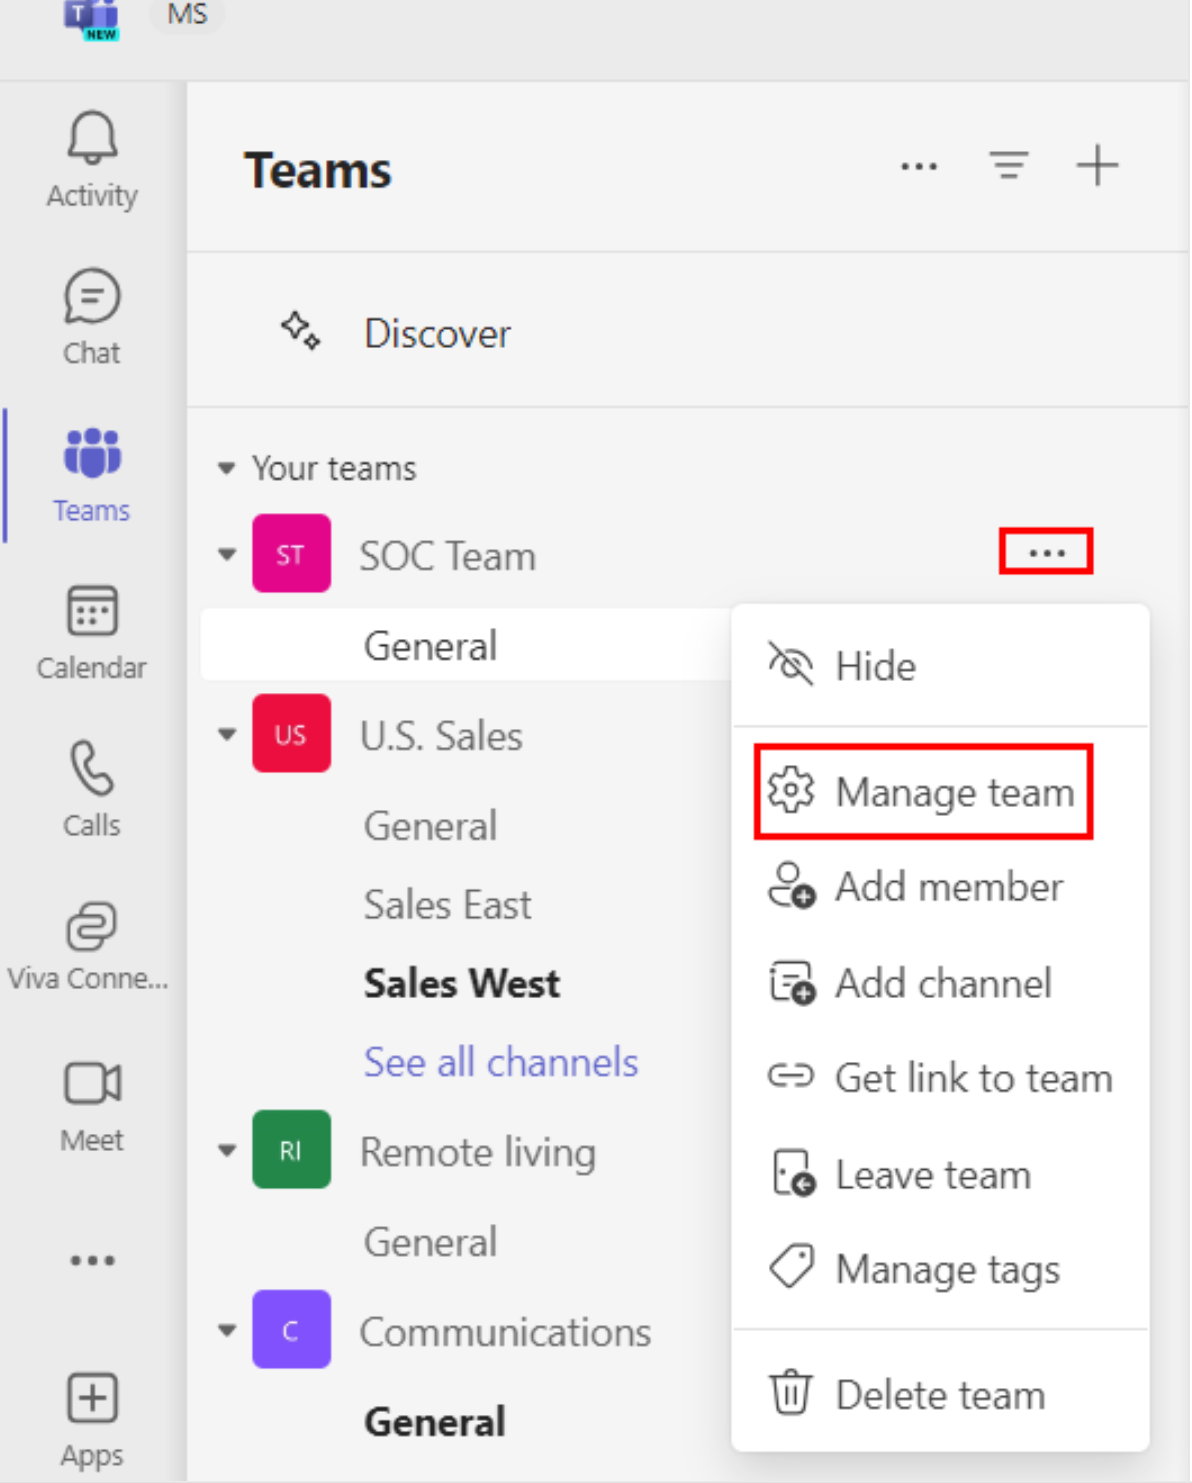 A screenshot of the managed team button.